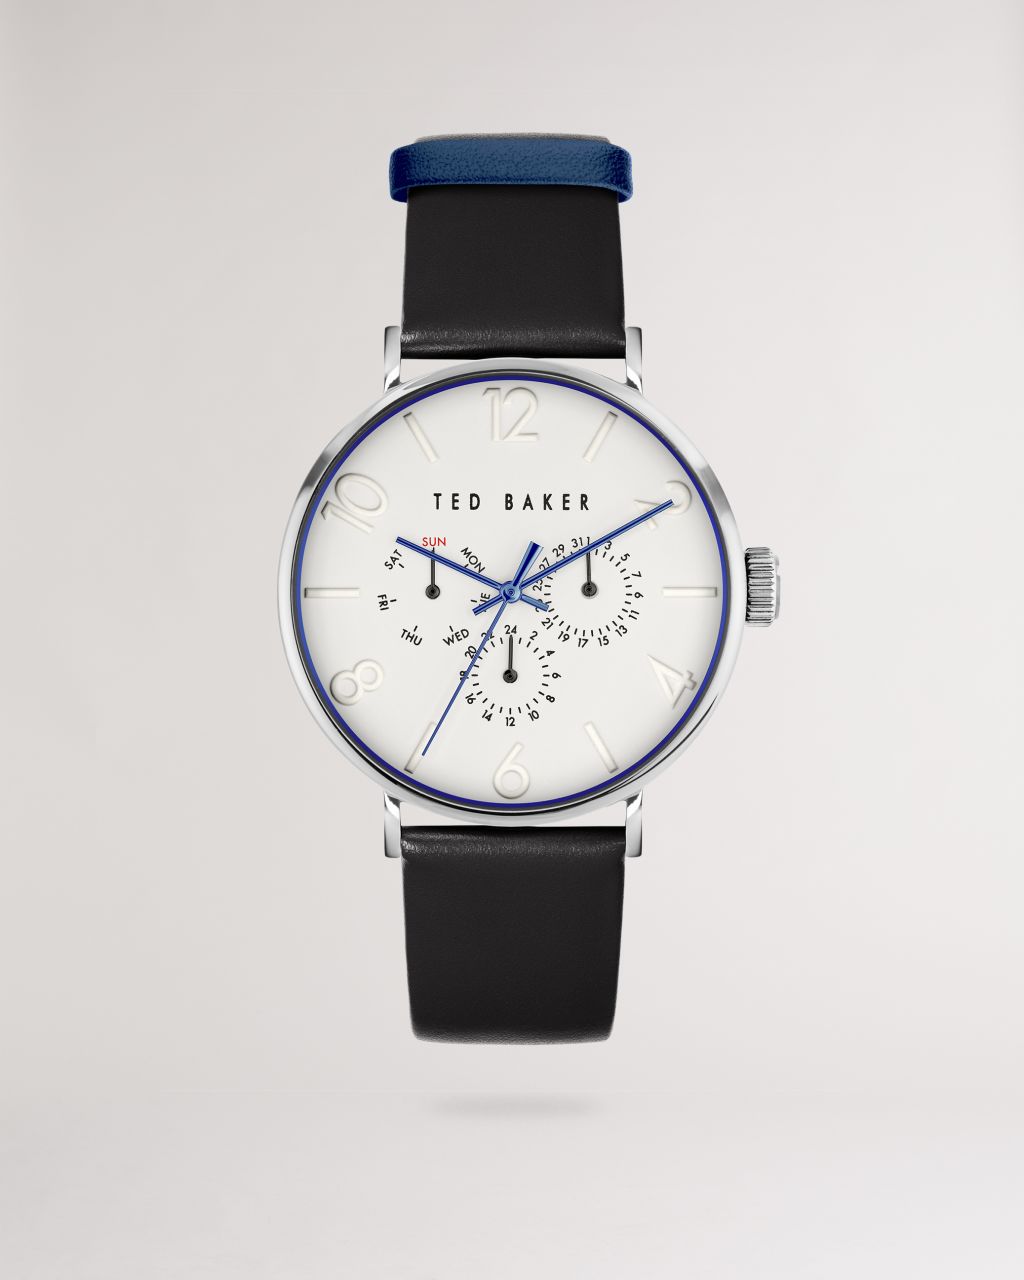 Ted Baker Leather Strap Multifunction Watch in Black MAGNT, Men's Accessories